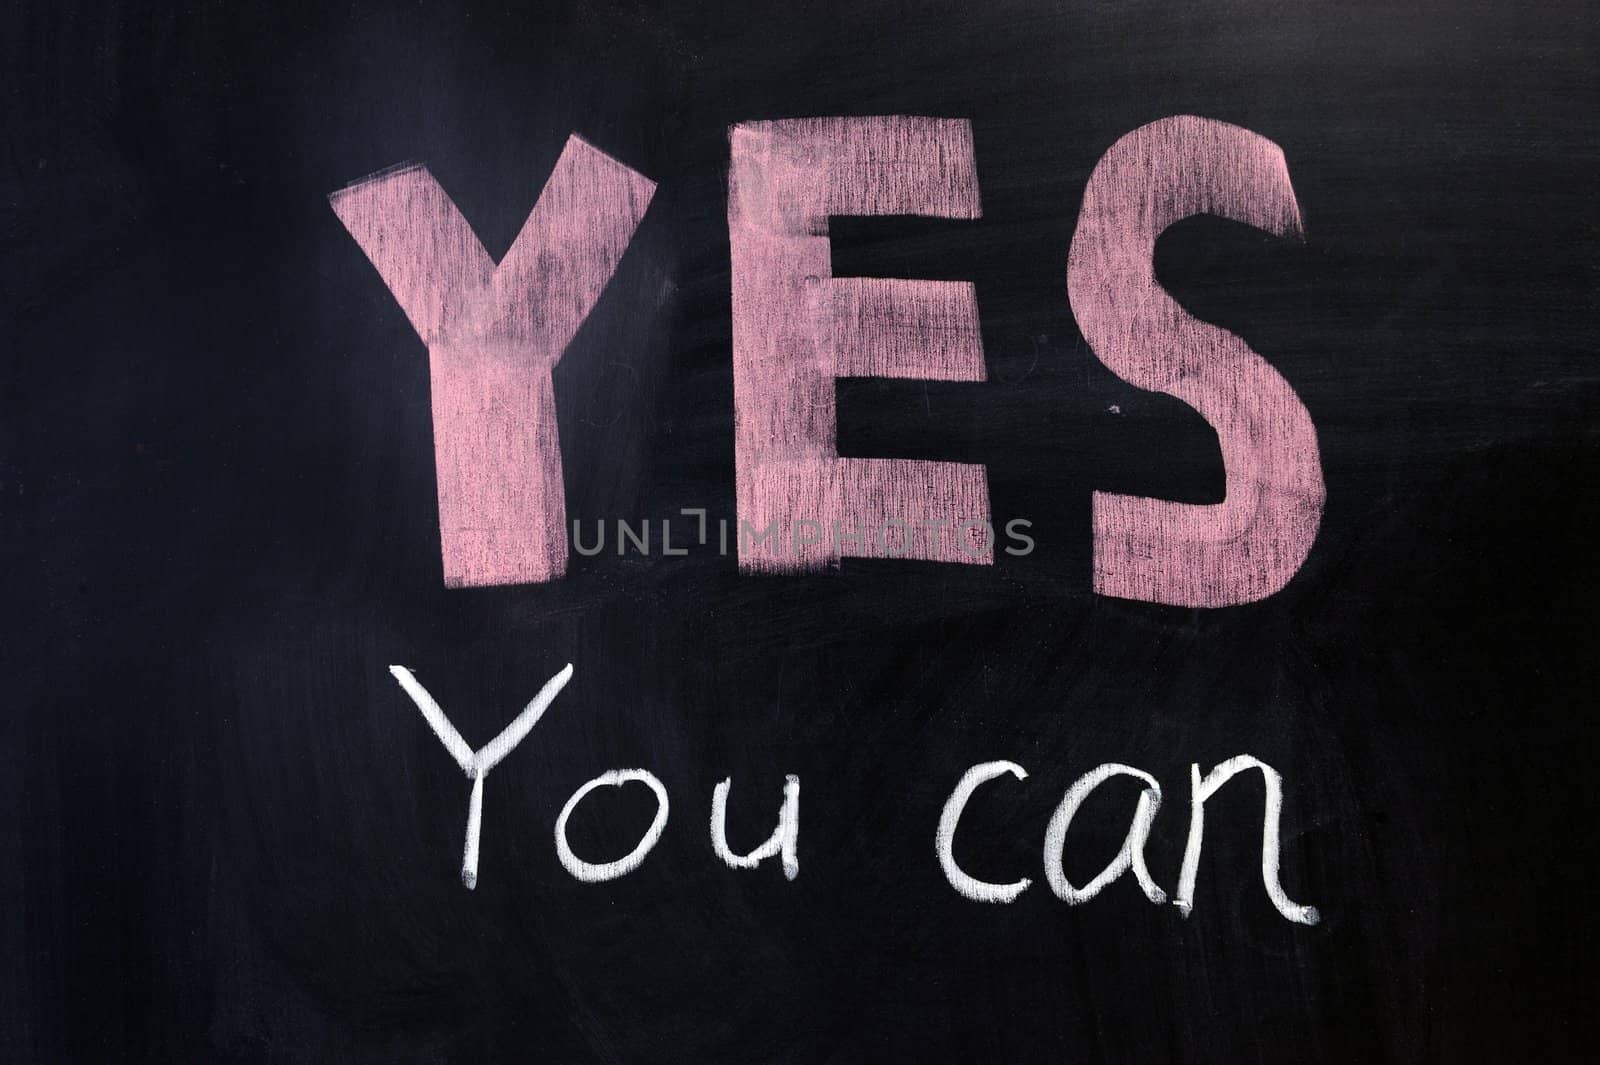 "YES you can" on chalkboard by raywoo